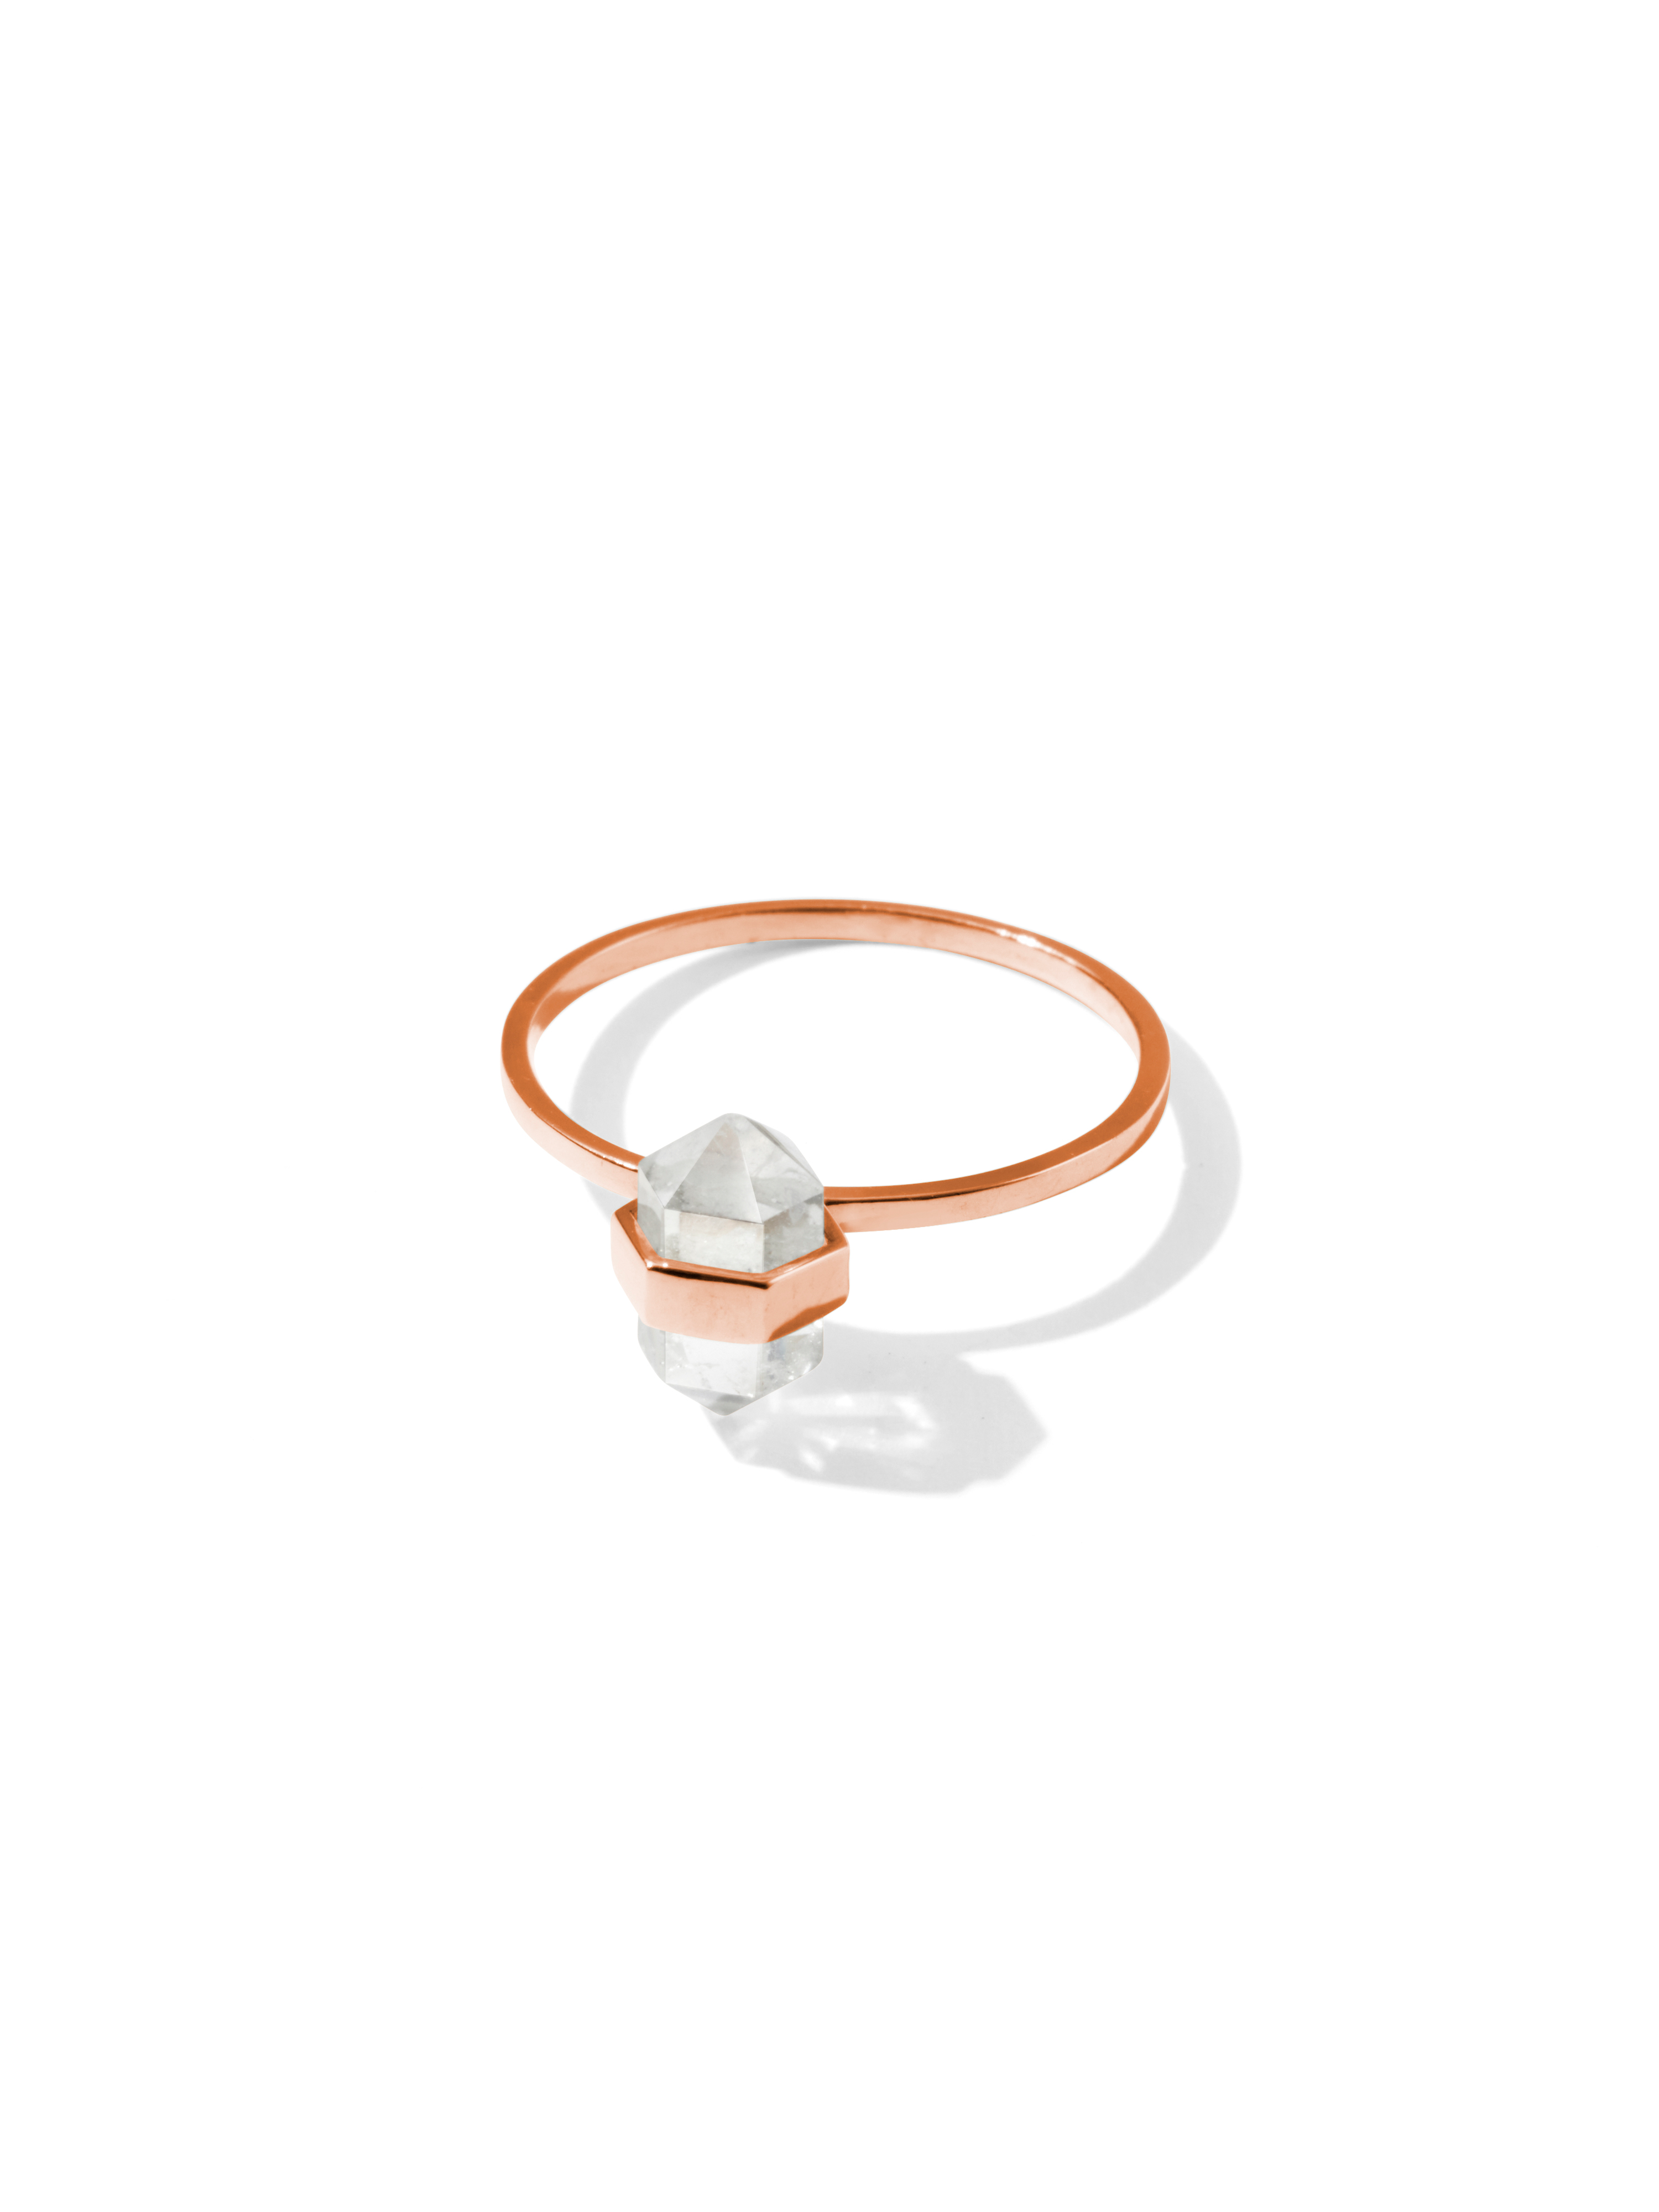 tiny calm crystal ring | clear quartz ROSE GOLD PLATED